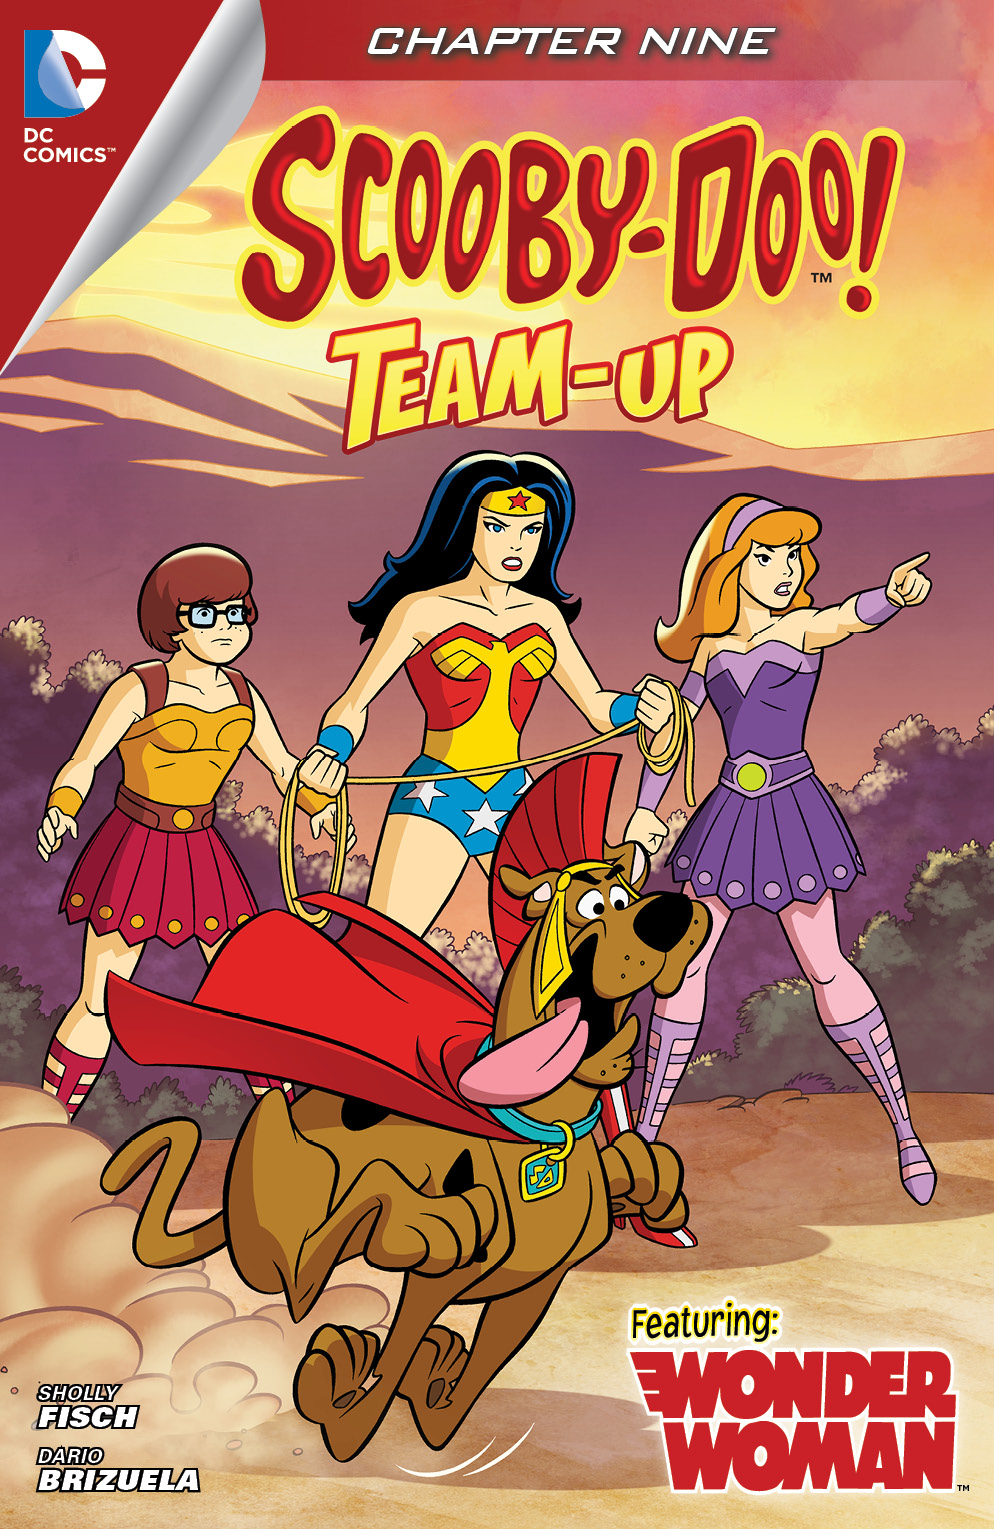 Scooby-Doo Team-Up #9 preview images